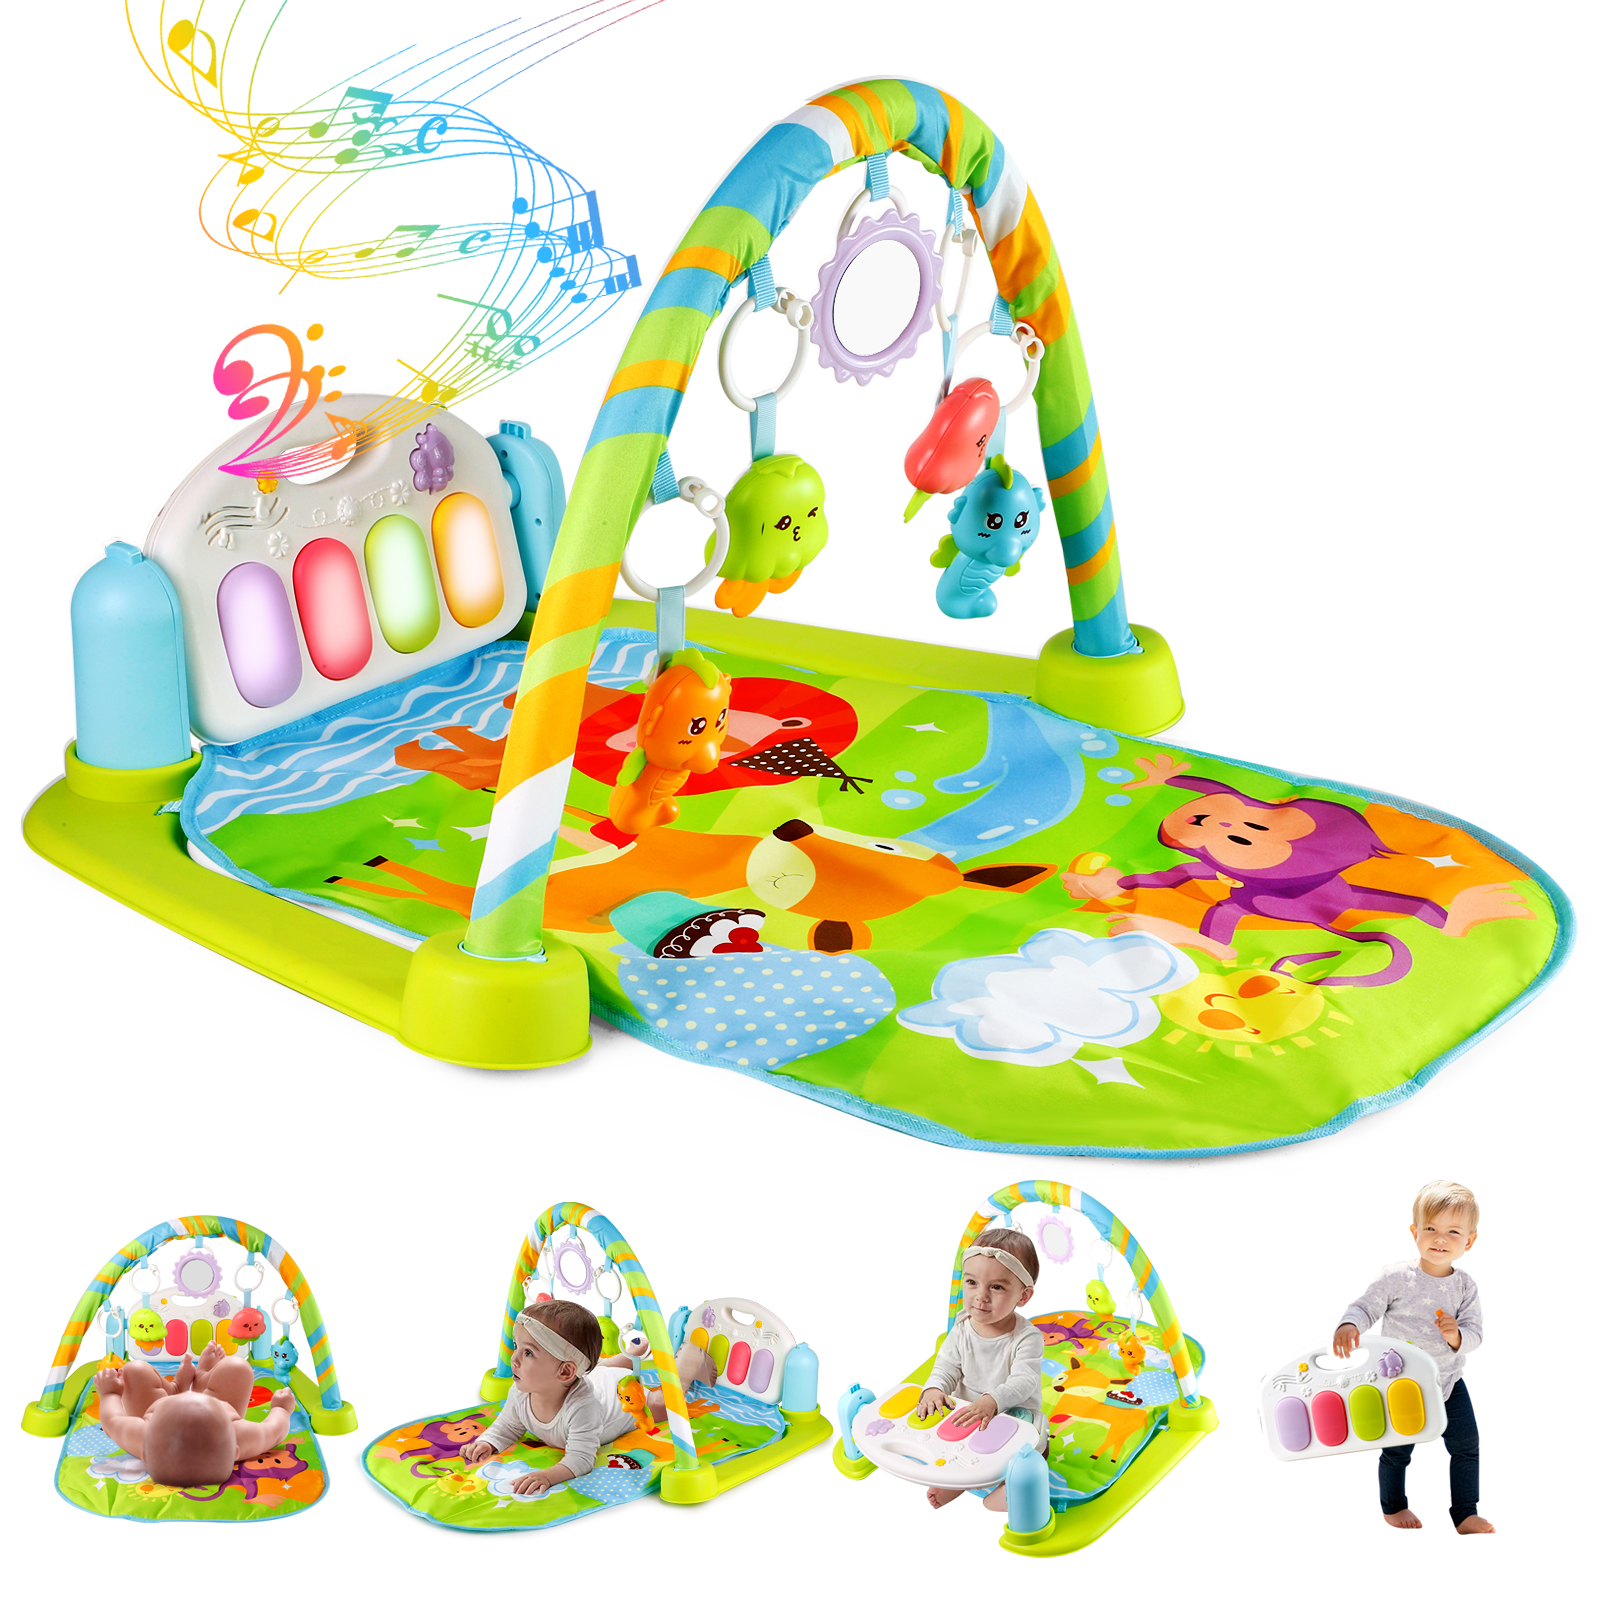 Baby Play Mat Baby Gym Funny Play Piano Tummy Time Baby Activity Gym Mat with 5 Infant Learning Sensory Baby Toys, Music and Lights Boy & Girl Gifts for Newborn Baby 0 to 3 6 9 12 Months - image 1 of 7